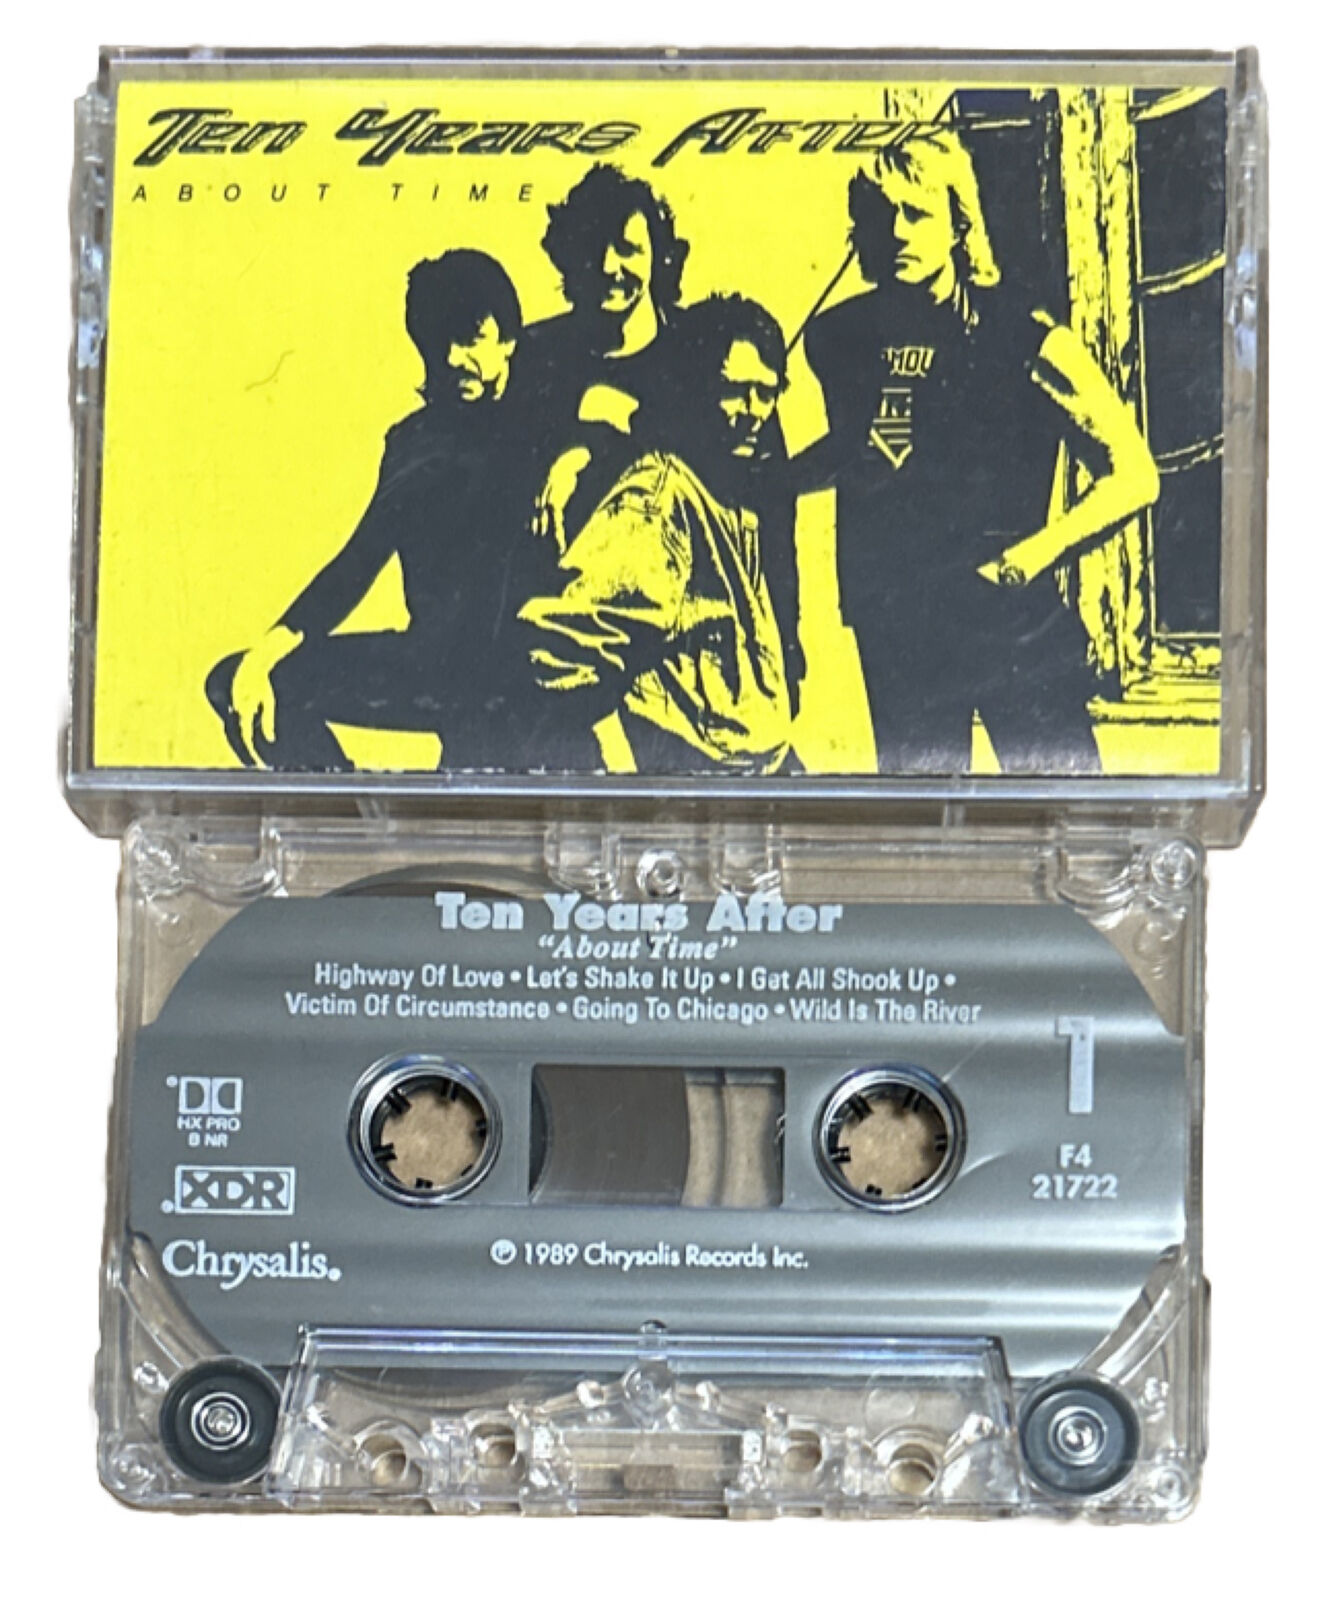 TEN YEARS AFTER - About Time - 1989 Cassette Tape